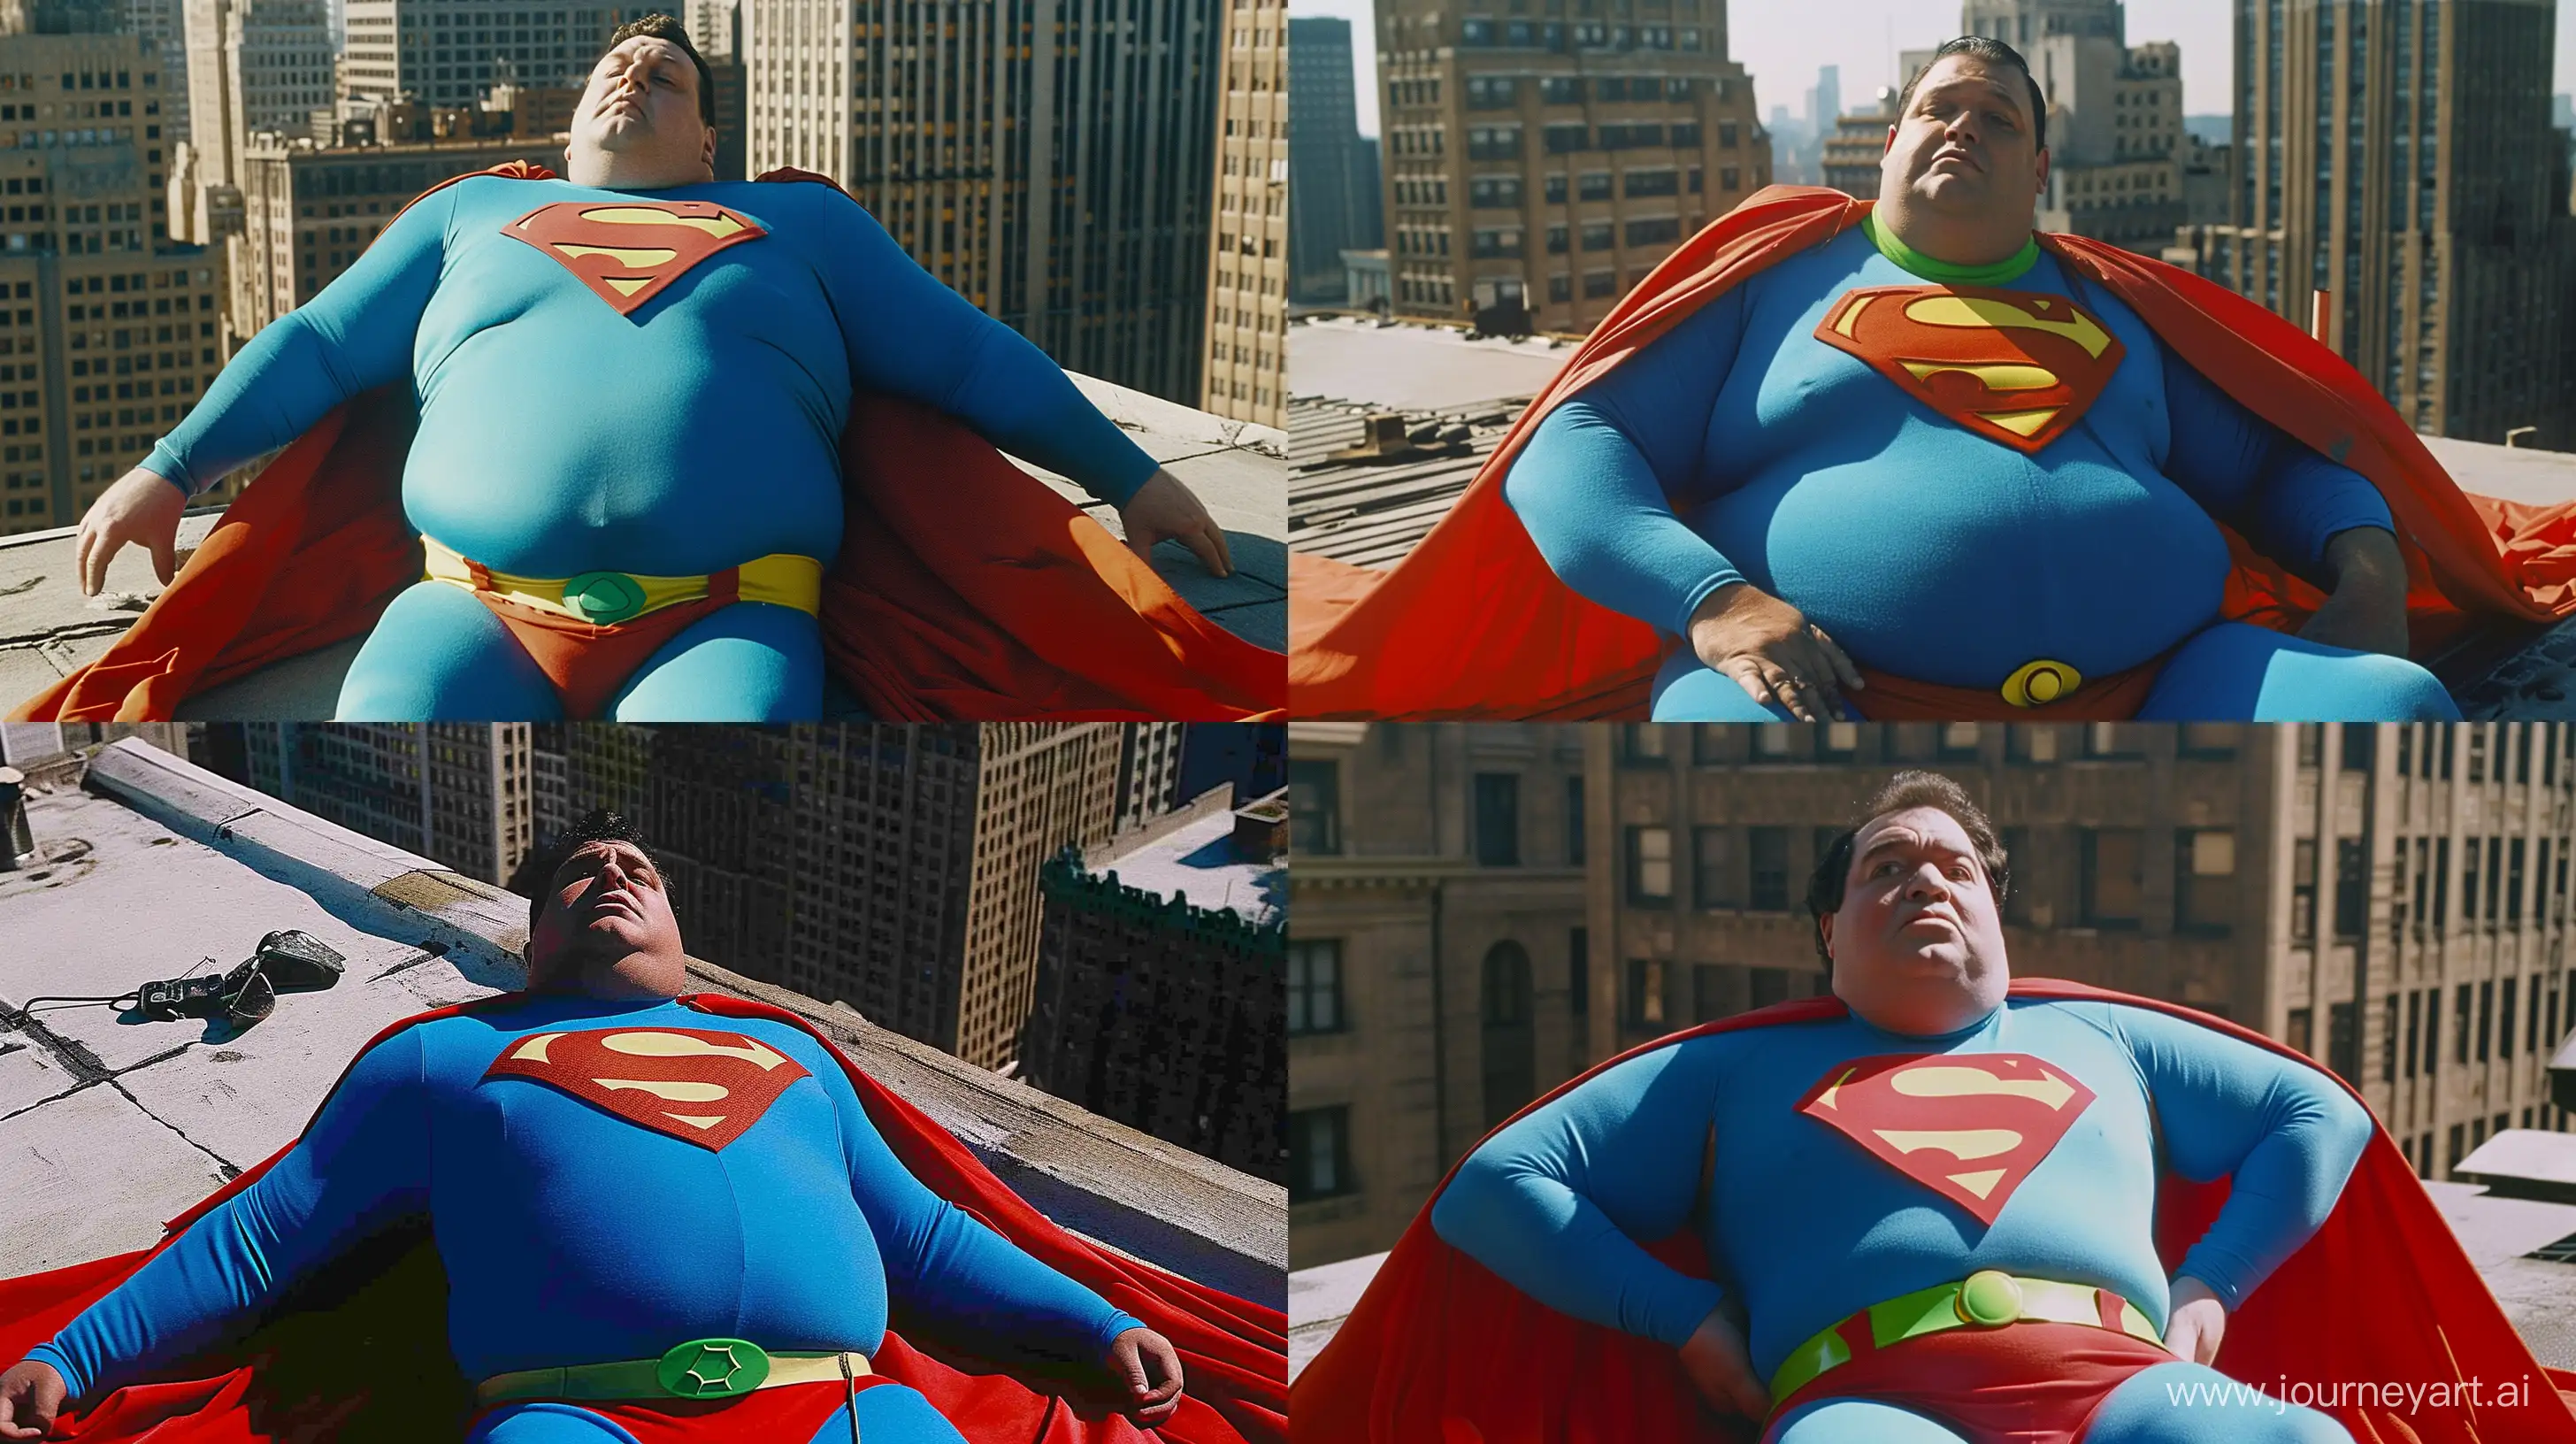 Cheerful-Superman-Relaxing-on-Rooftop-Under-Sunlight